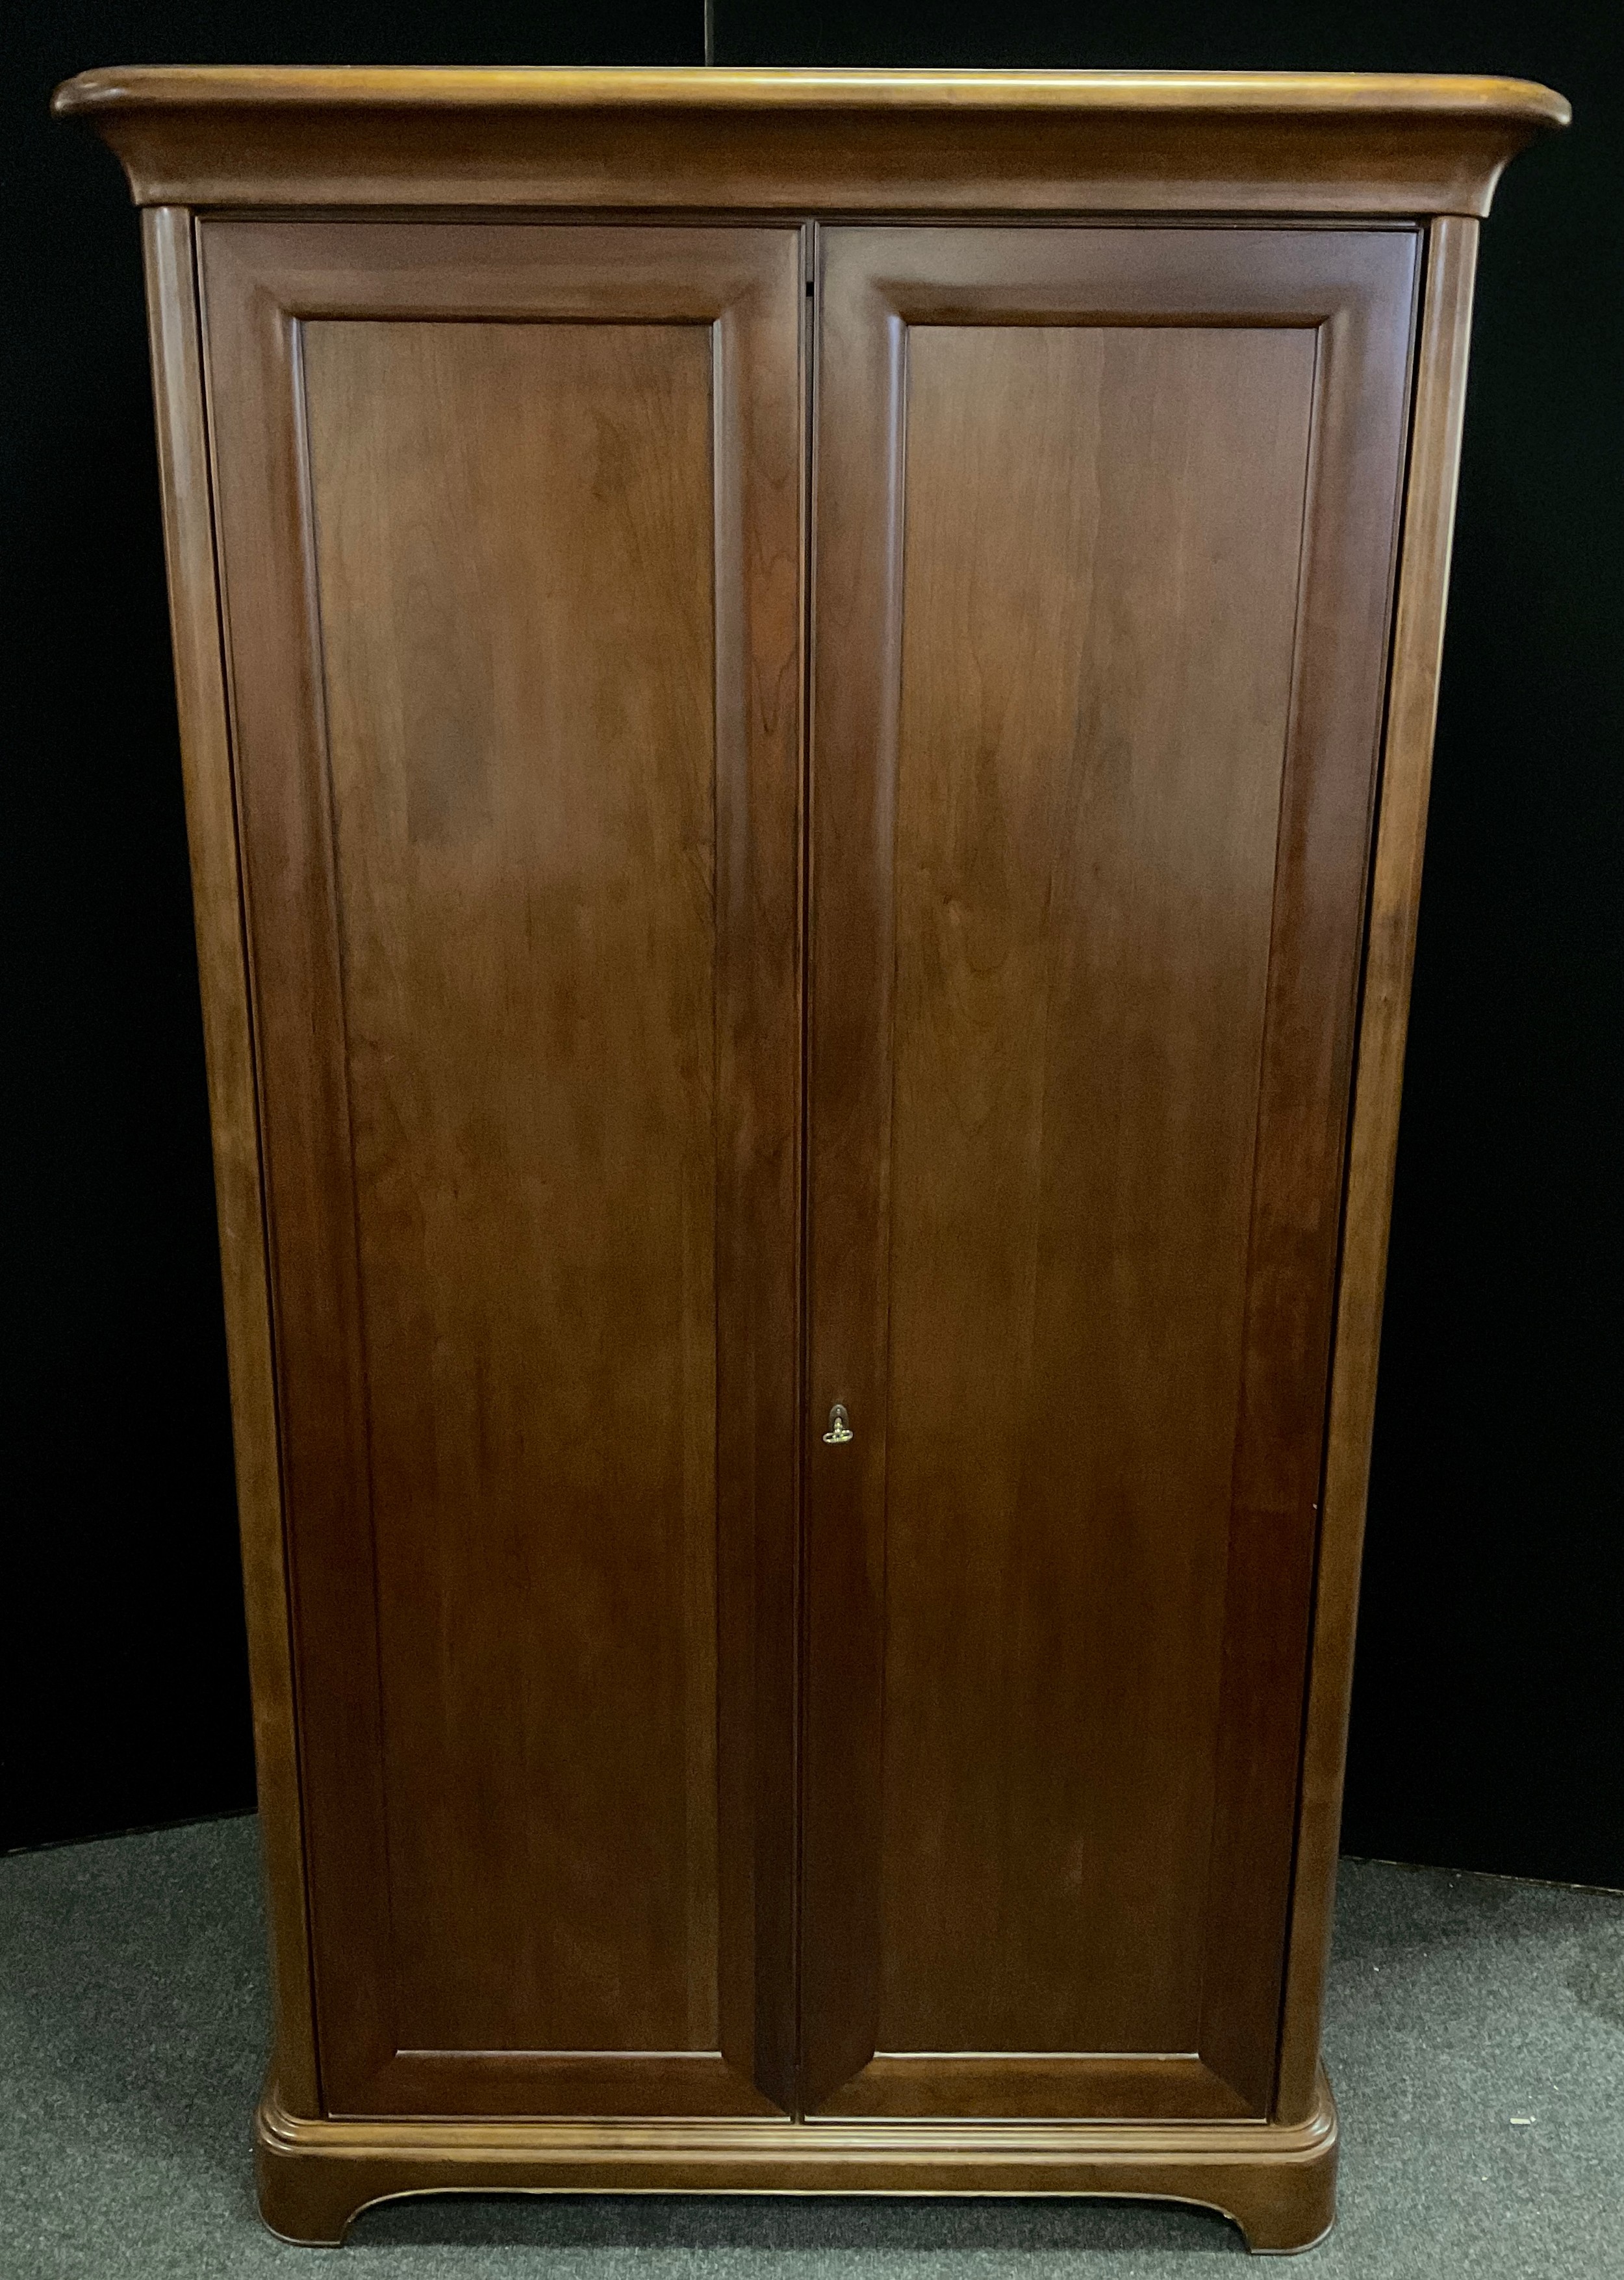 A Willis and Gambier mahogany wardrobe, over-sailing cornice, above a pair of panelled doors, single - Image 2 of 2